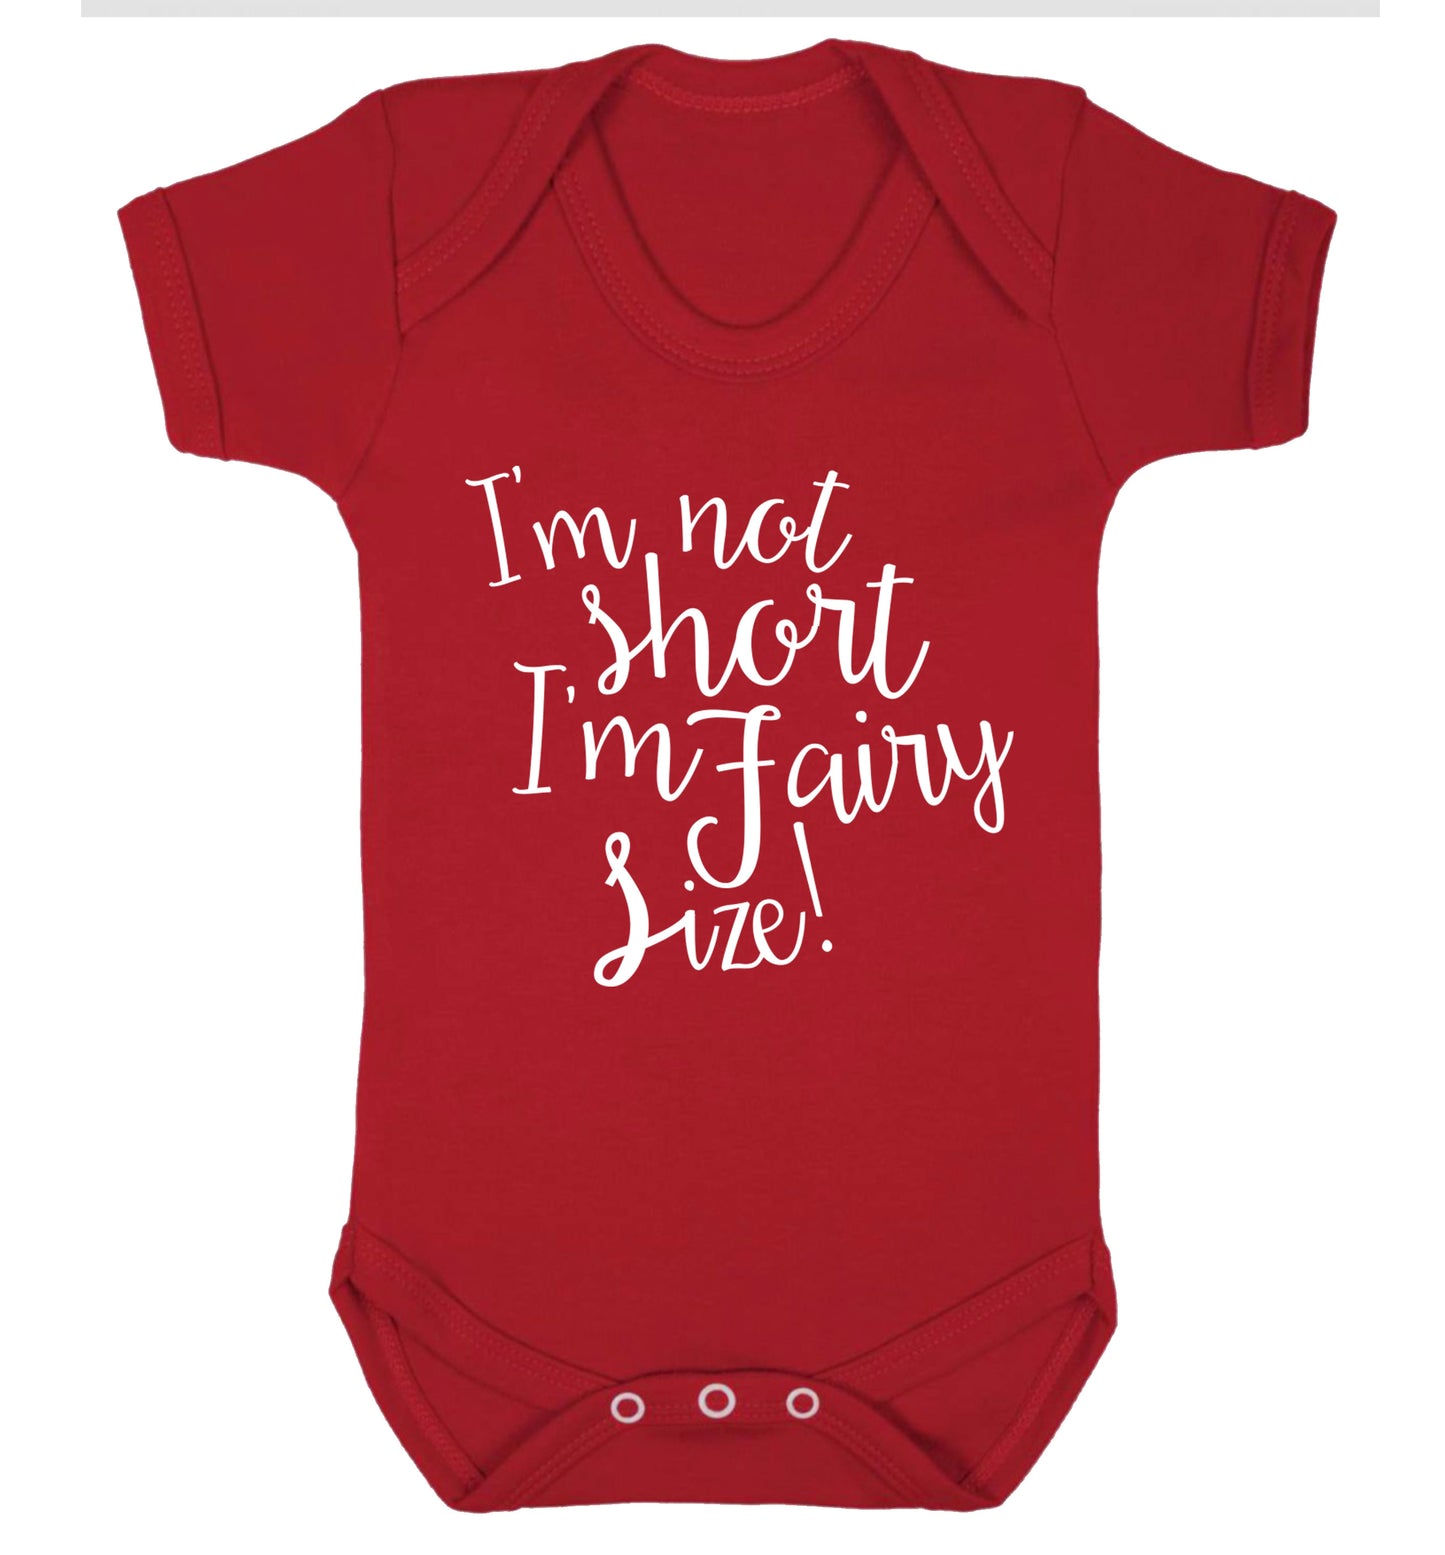 I'm not short I'm fairy sized! Baby Vest red 18-24 months